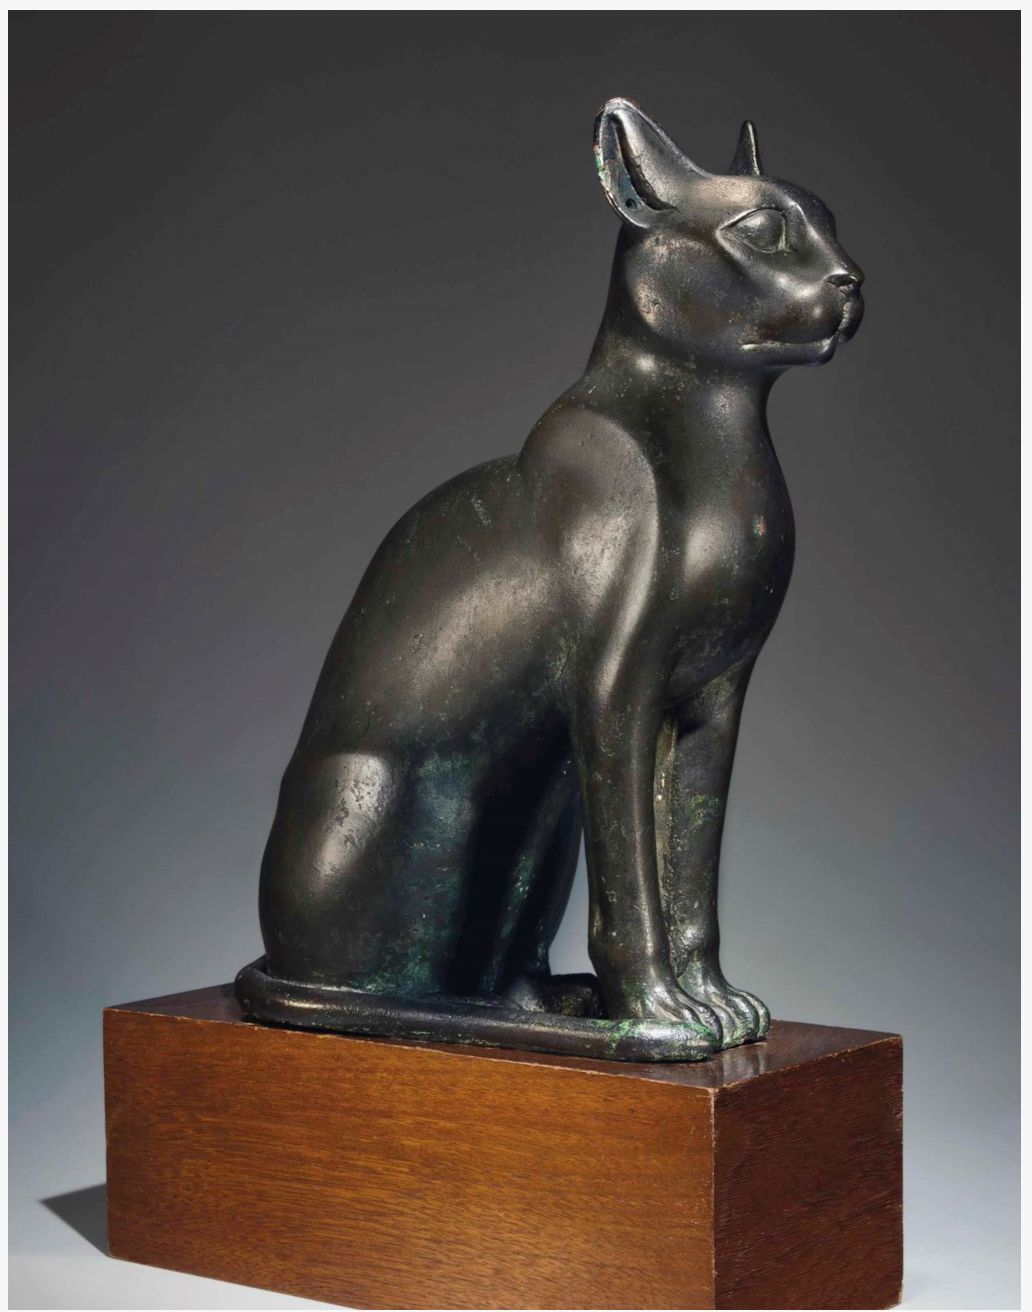 Visit our blog - Most Expensive Cat Objects de Art and Cat Jewelry Ever Auctioned! (Part 1): https://www.kittysensations.com/blogs/cat-lifestyle/most-expensive-cat-objects-de-art-and-cat-jewelry-ever-auctioned-part-1